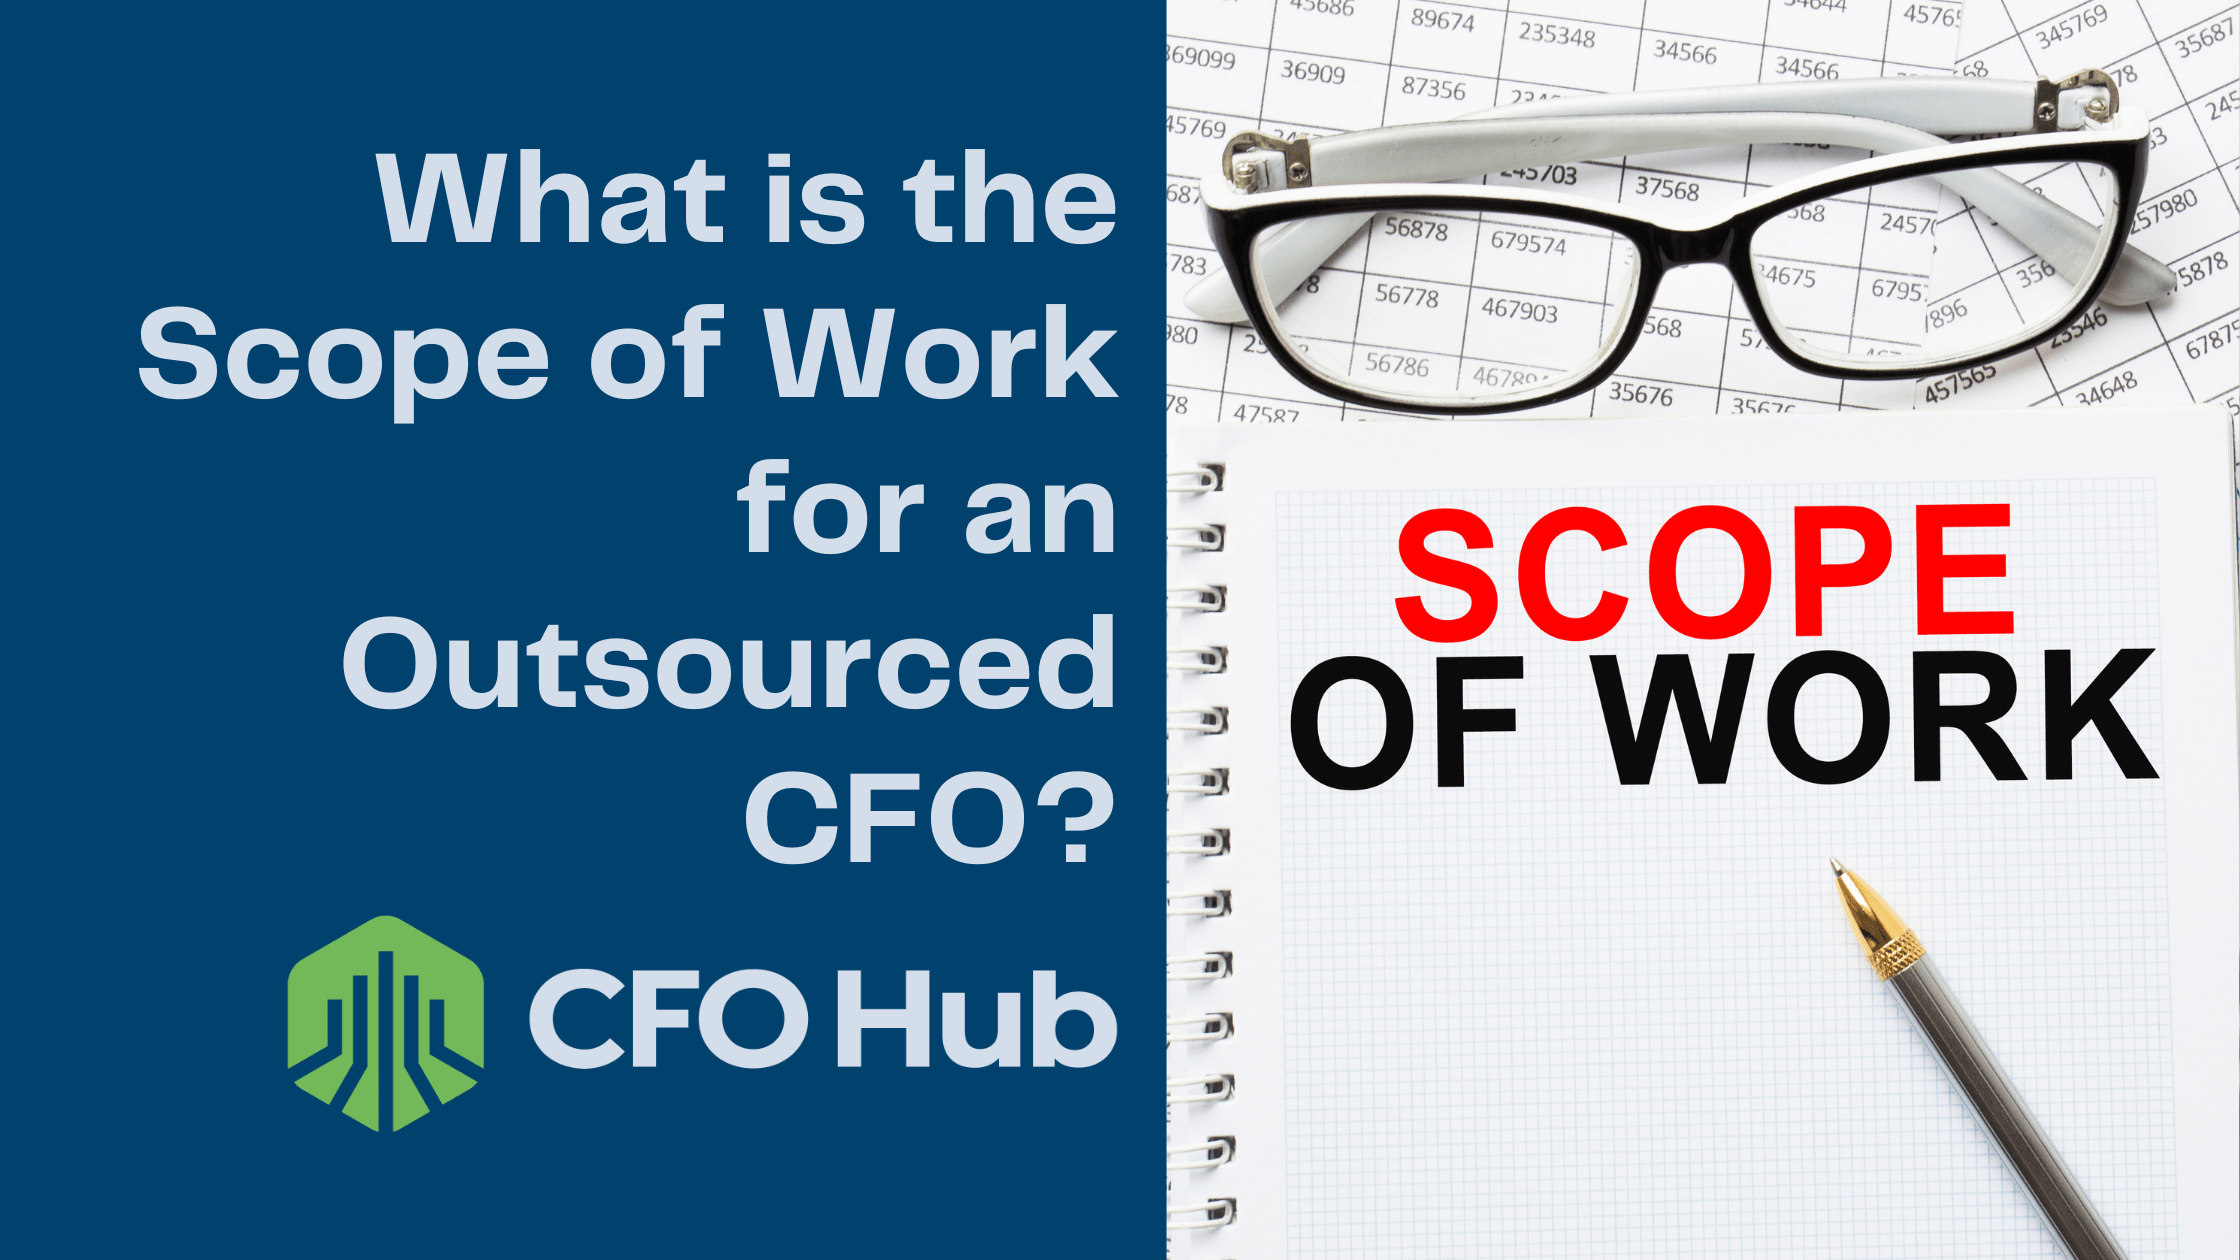 A blue background with the text "What is the Scope of Work for an Outsourced CFO?" and "CFO Hub" near a green logo. Beside it, glasses rest on financial documents, and a notebook with "SCOPE OF WORK" written in black and red text is accompanied by a pen detailing CFO Responsibilities.